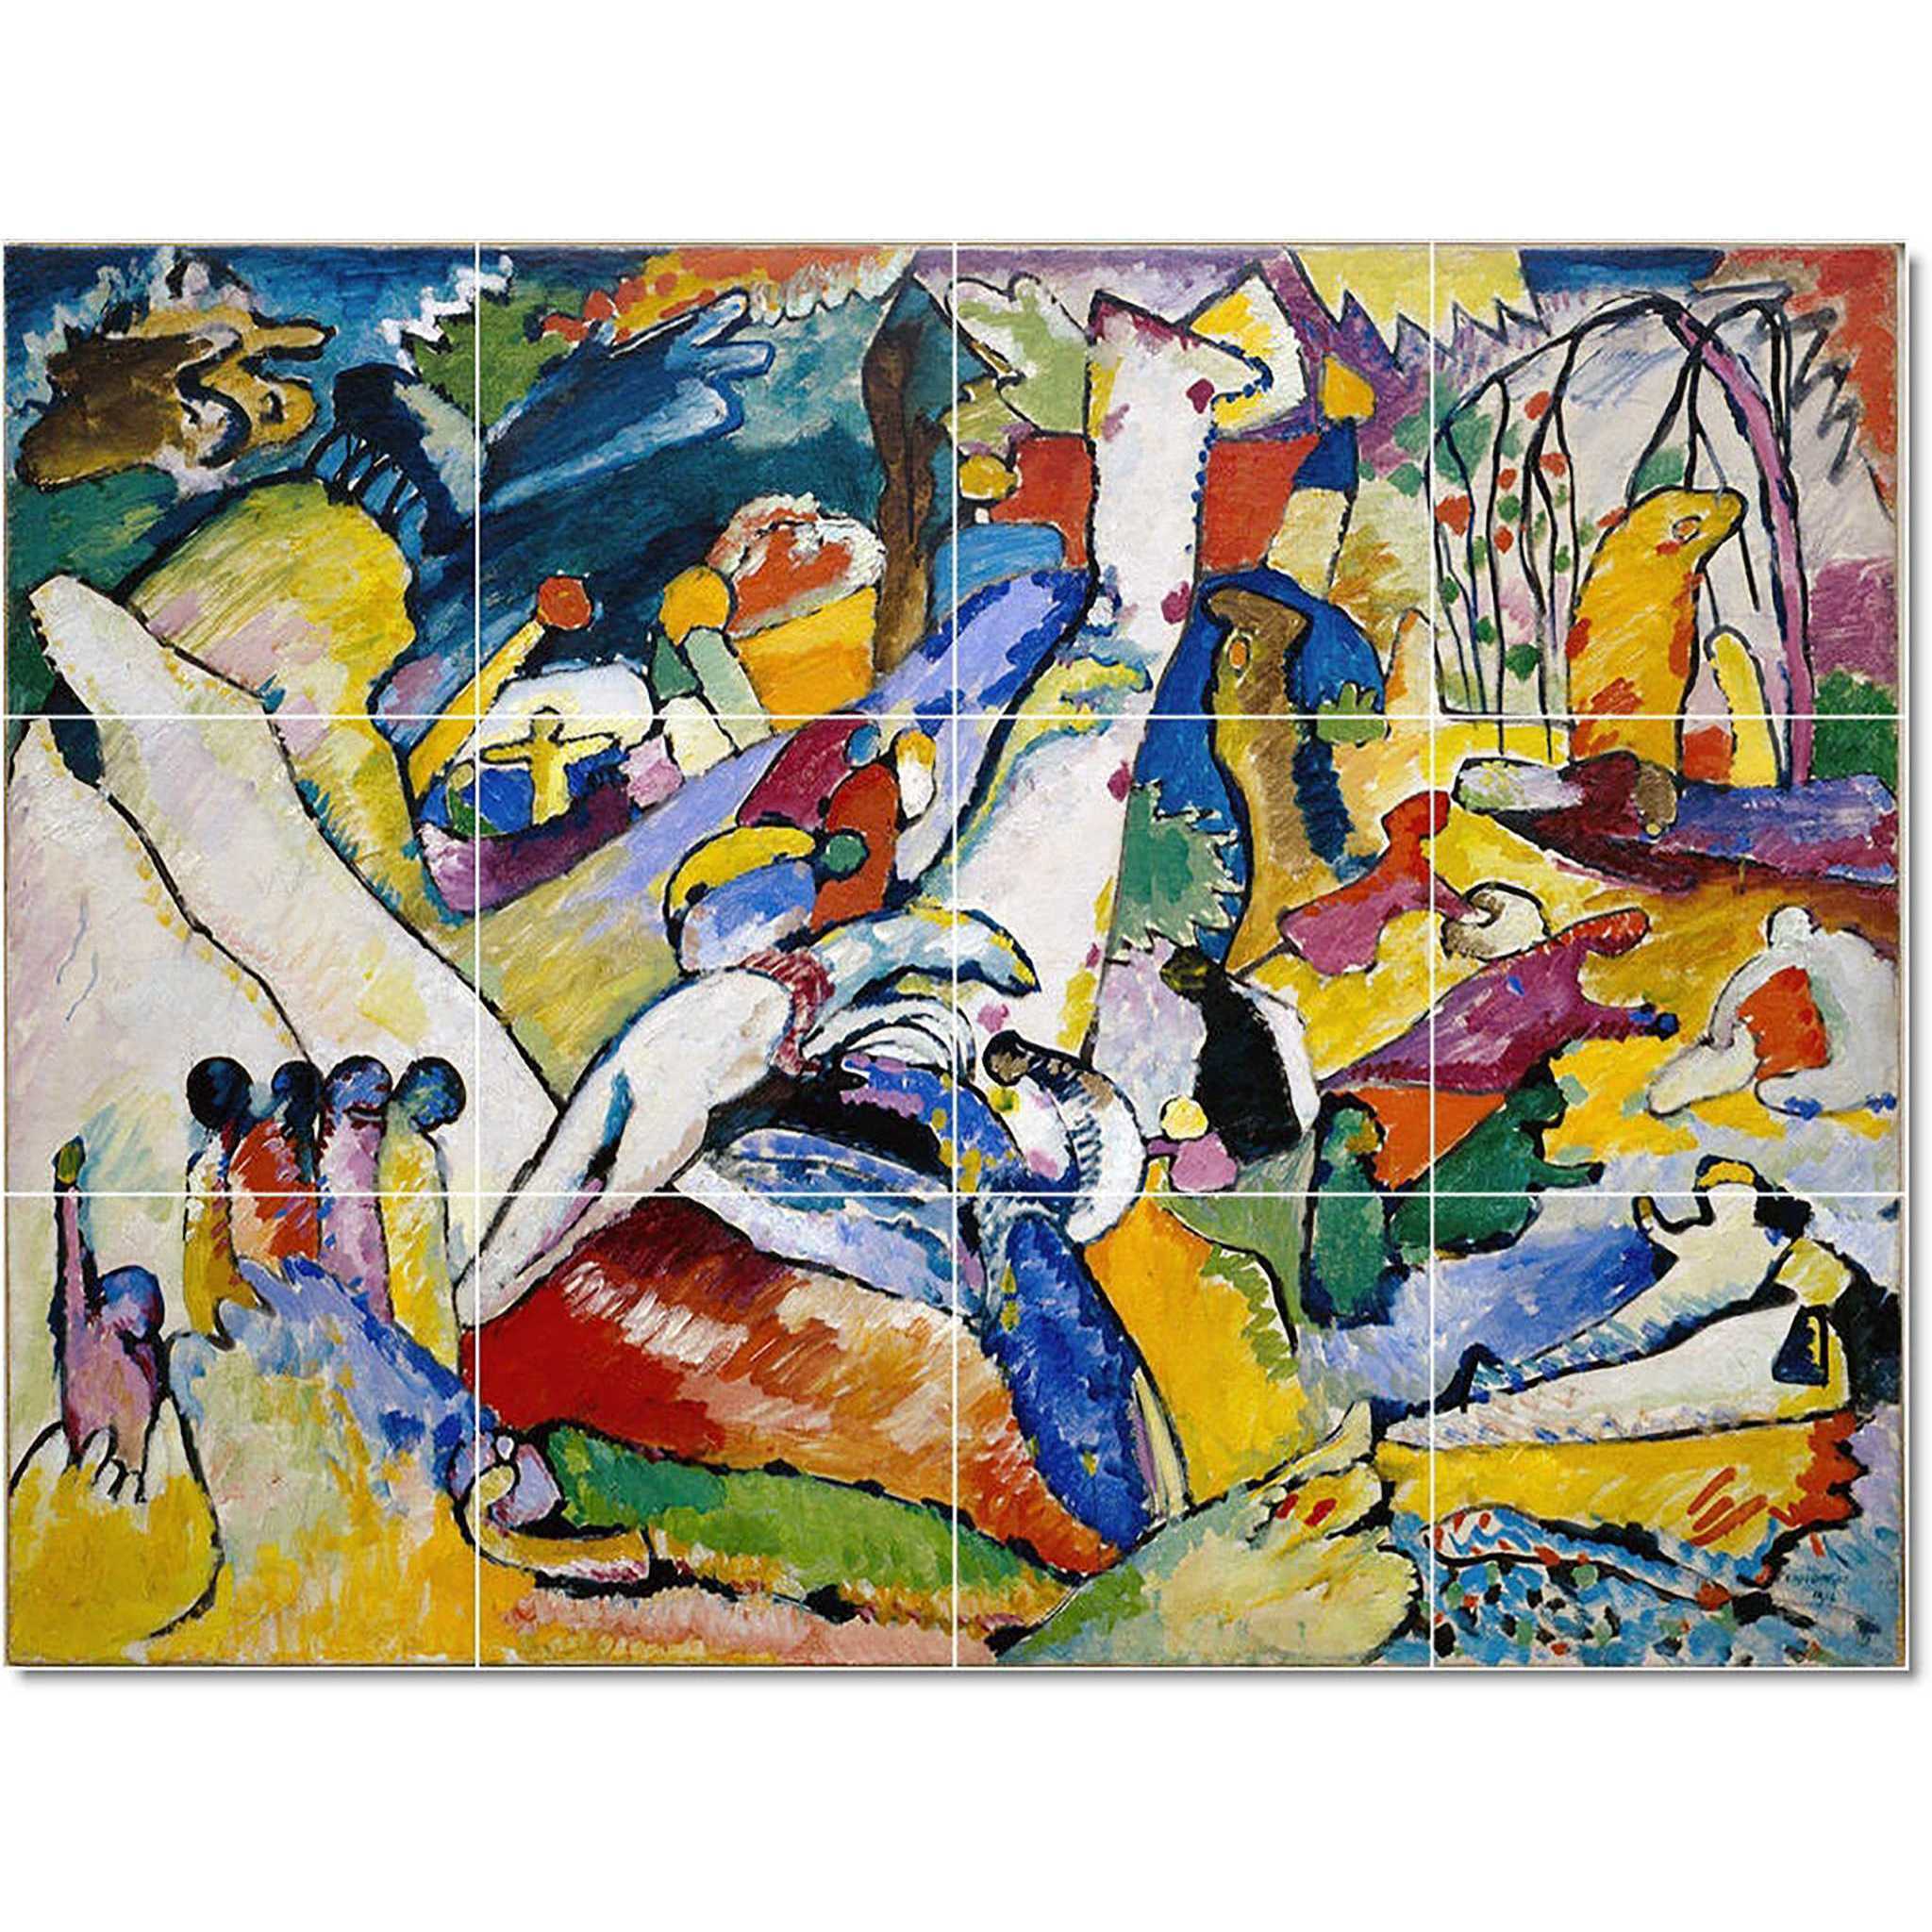 wassily kandinsky abstract painting ceramic tile mural p22733